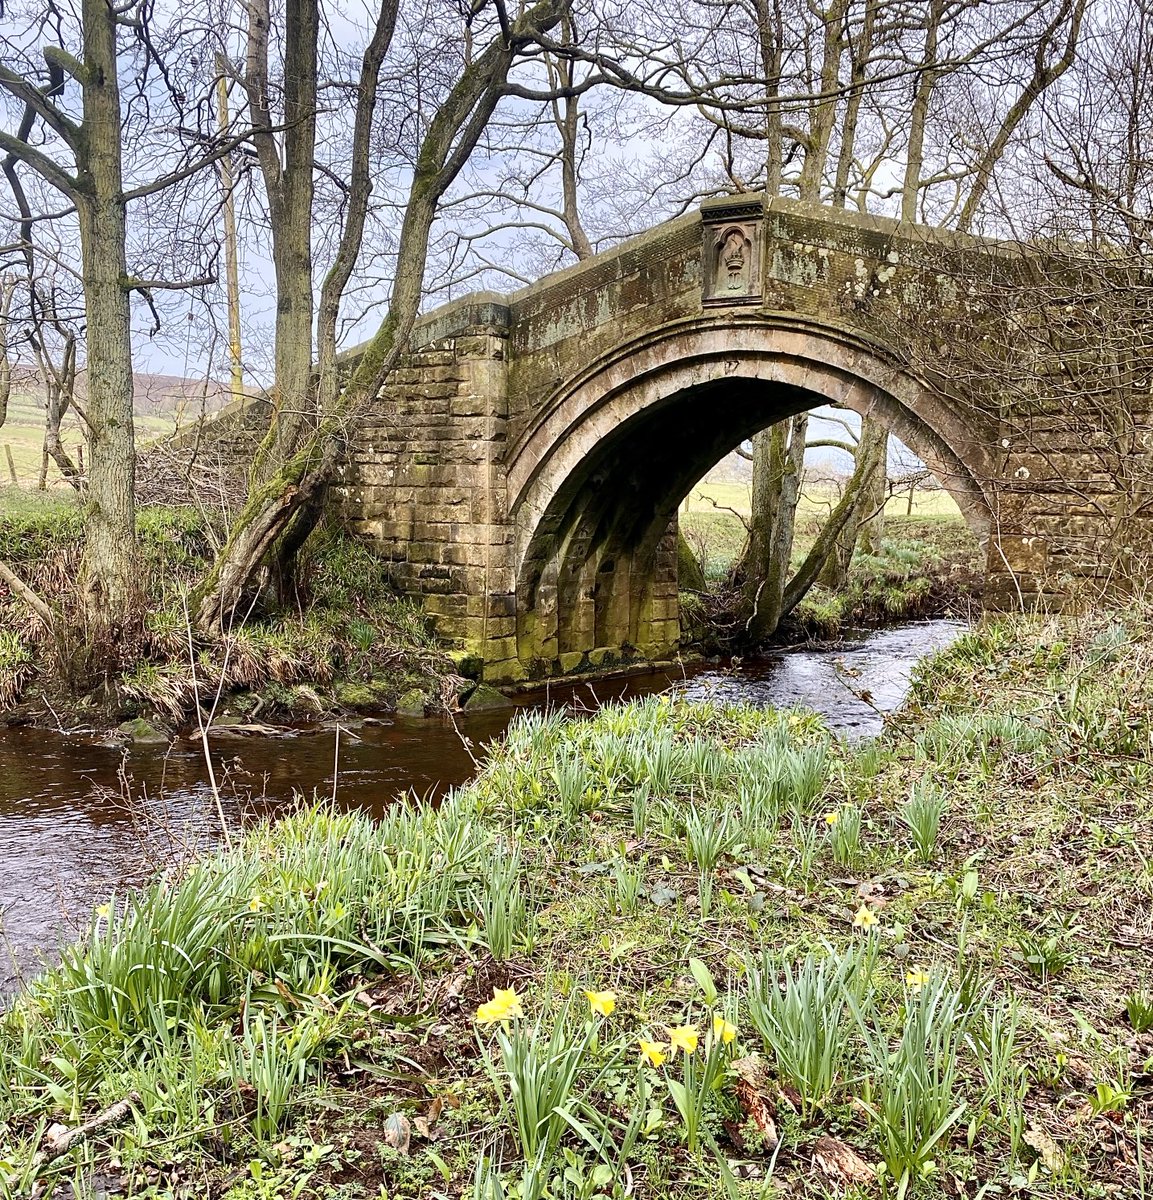 Wishing you a happy Thursday from Hunter’s Sty Bridge, North Yorkshire 😊